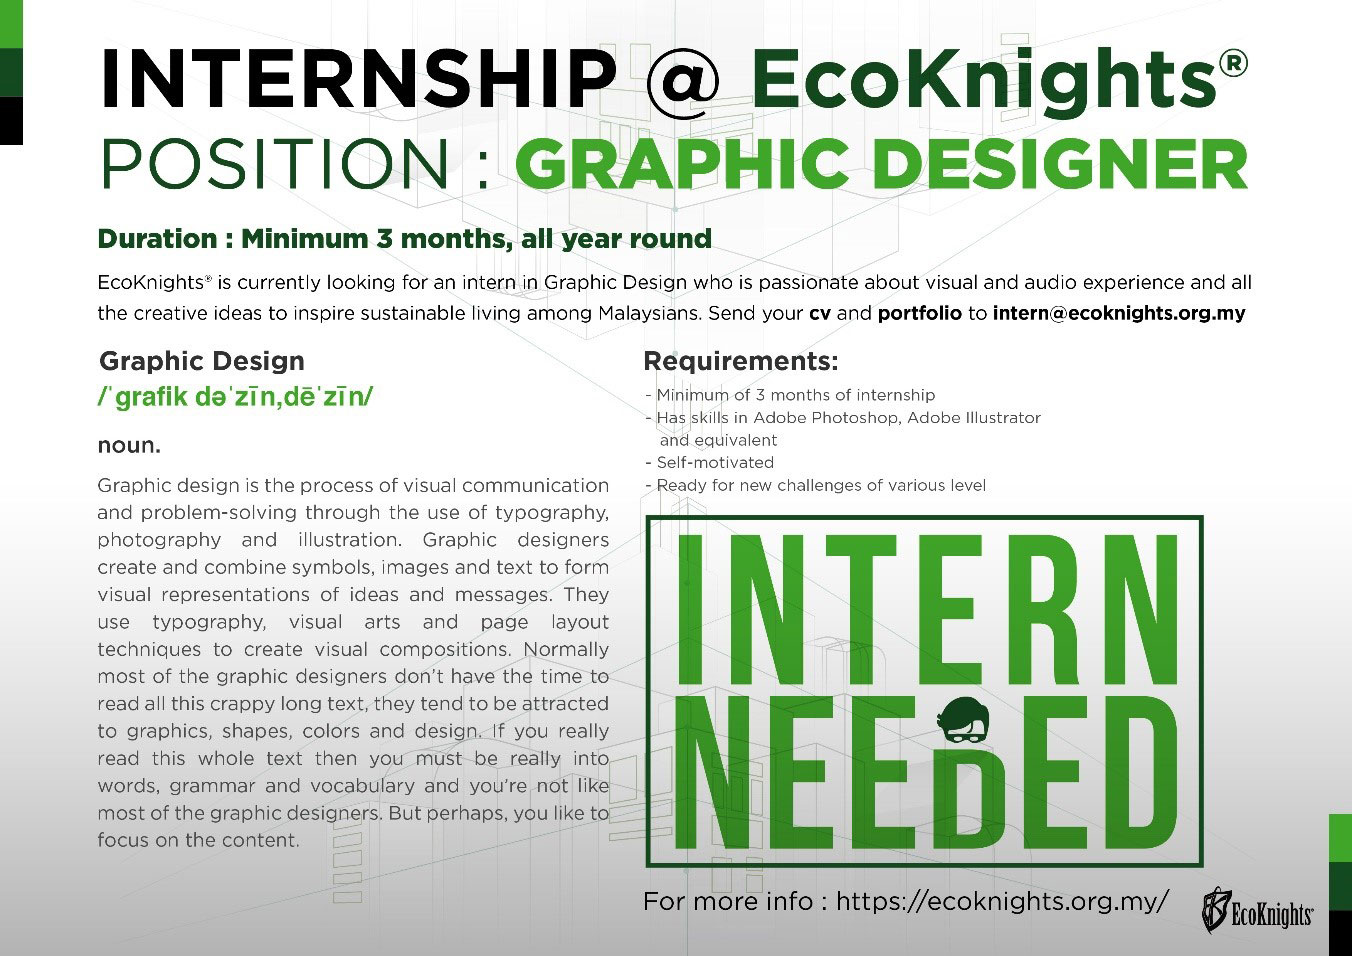 Calling for Interns in Graphic Design